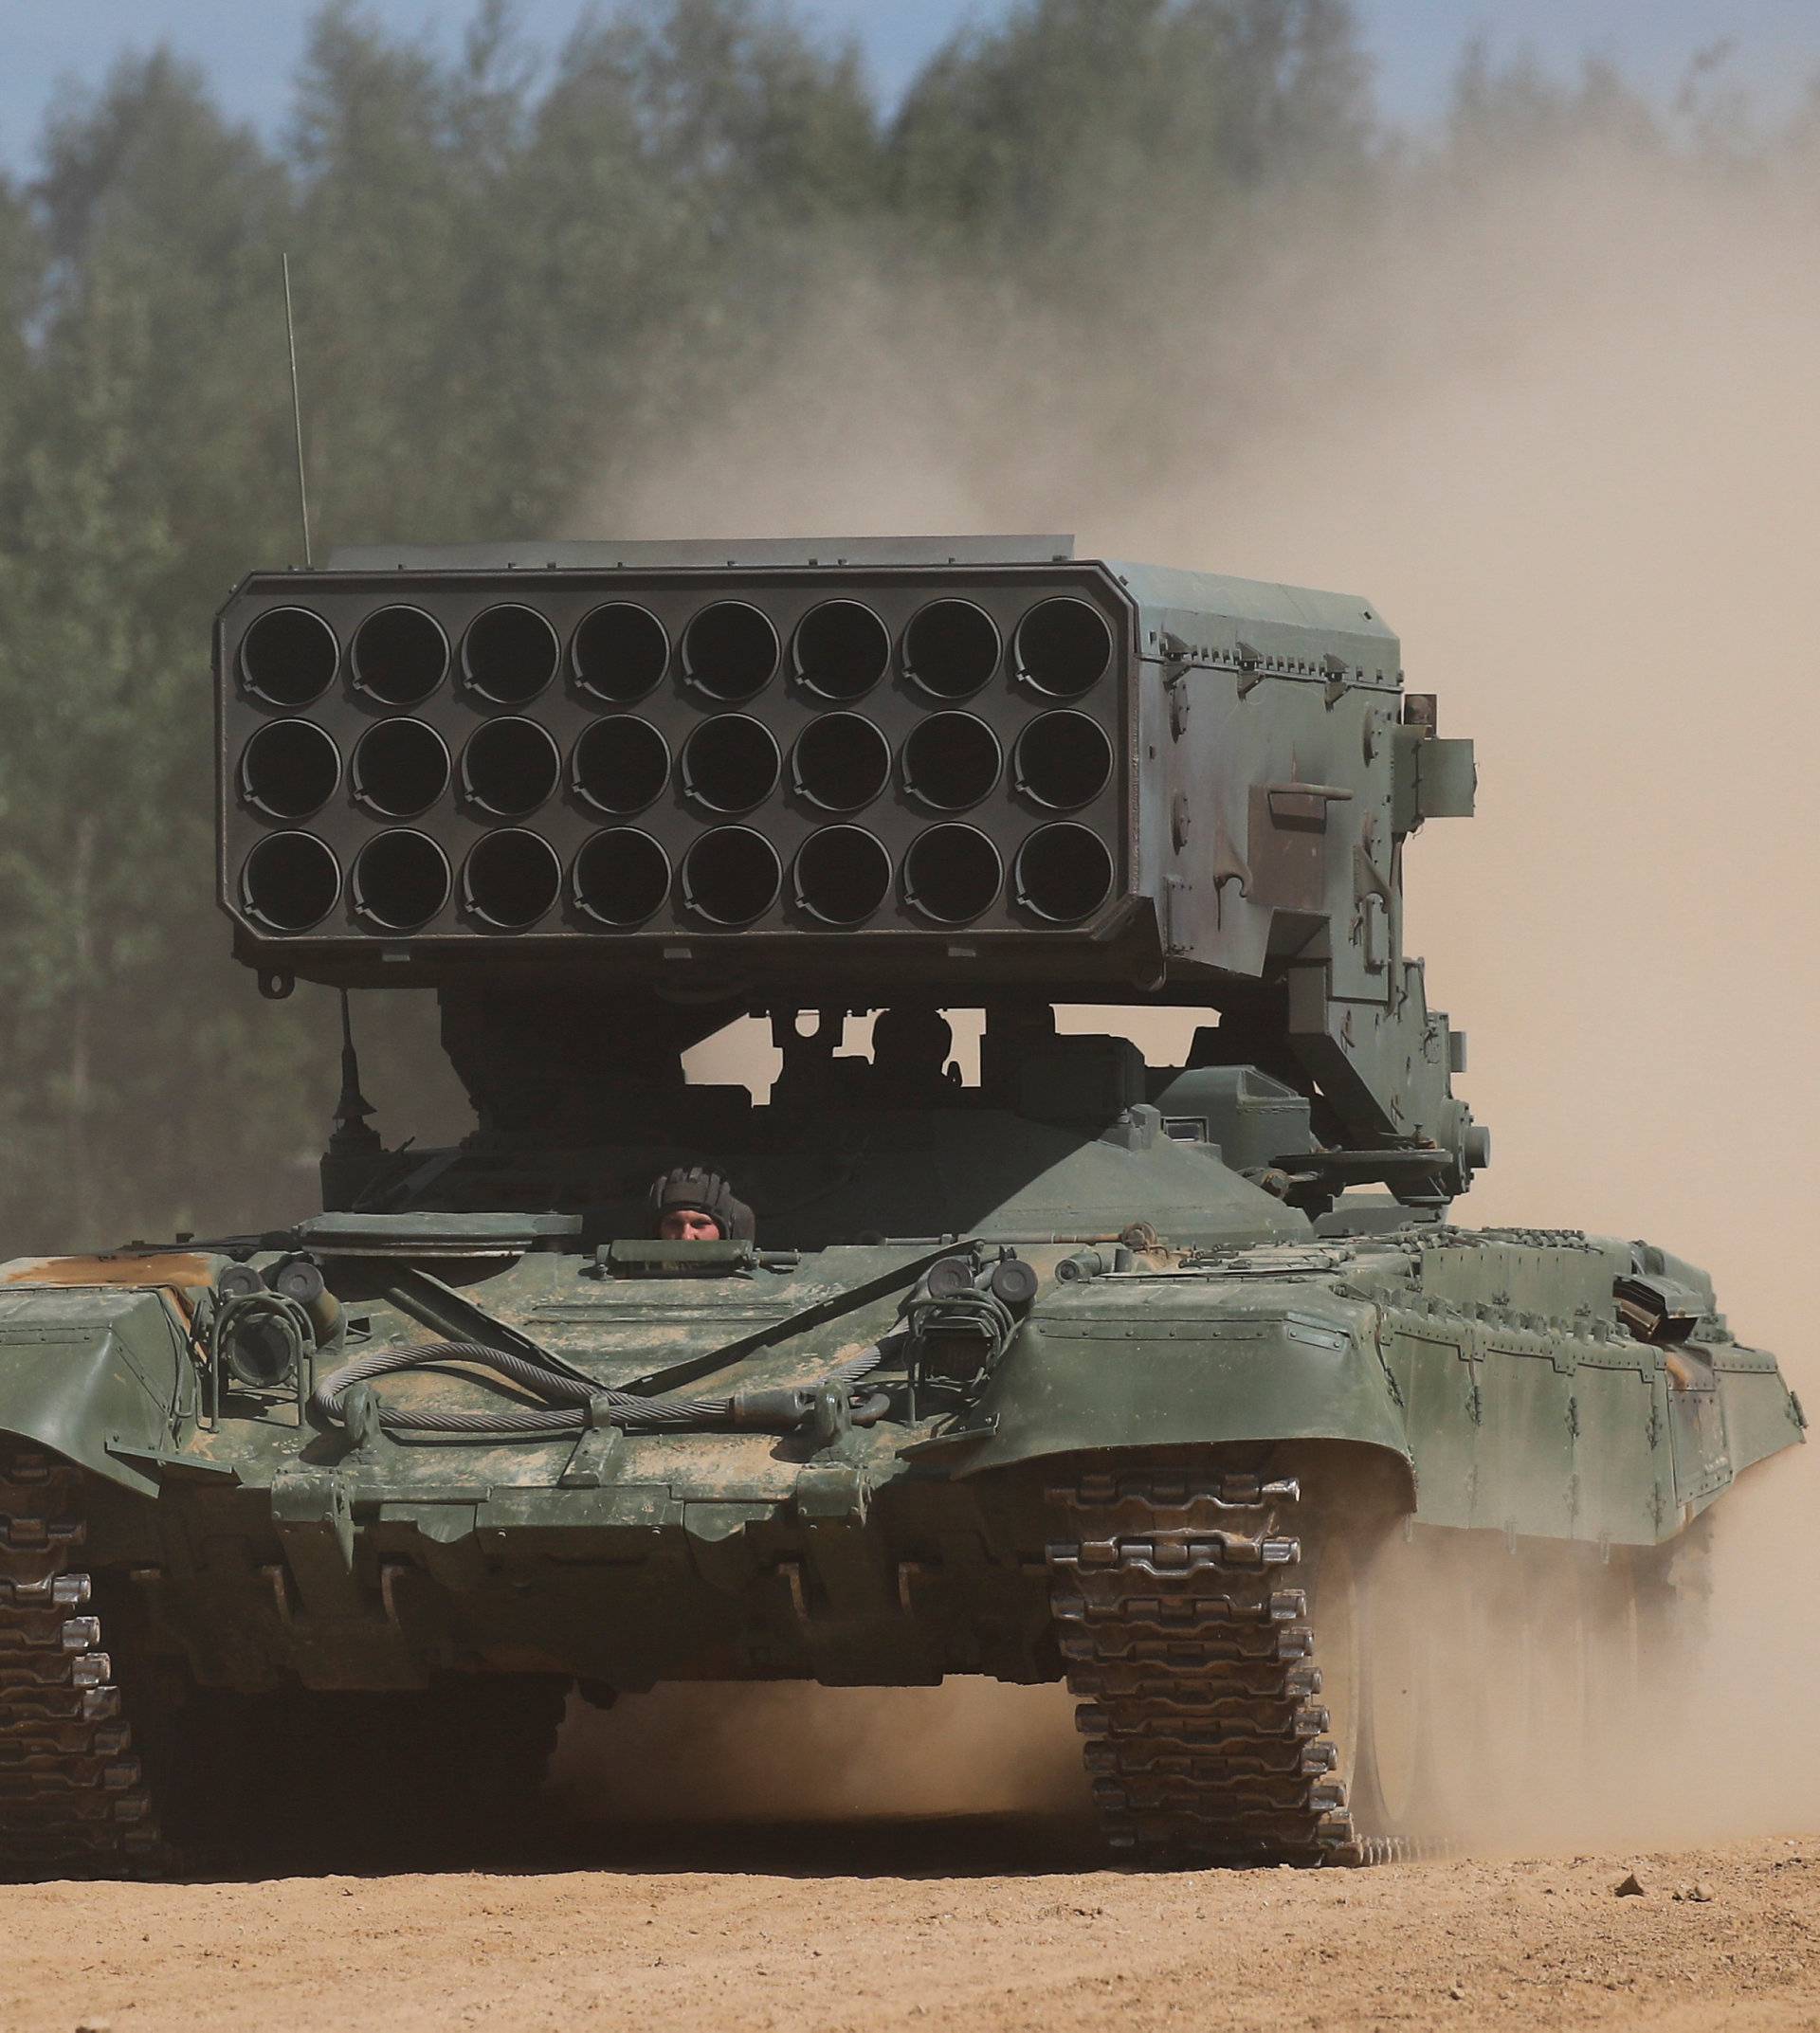 A Russian TOS-1A Solntsepek multiple rocket launcher drives during the annual international military-technical forum "ARMY" in Alabino